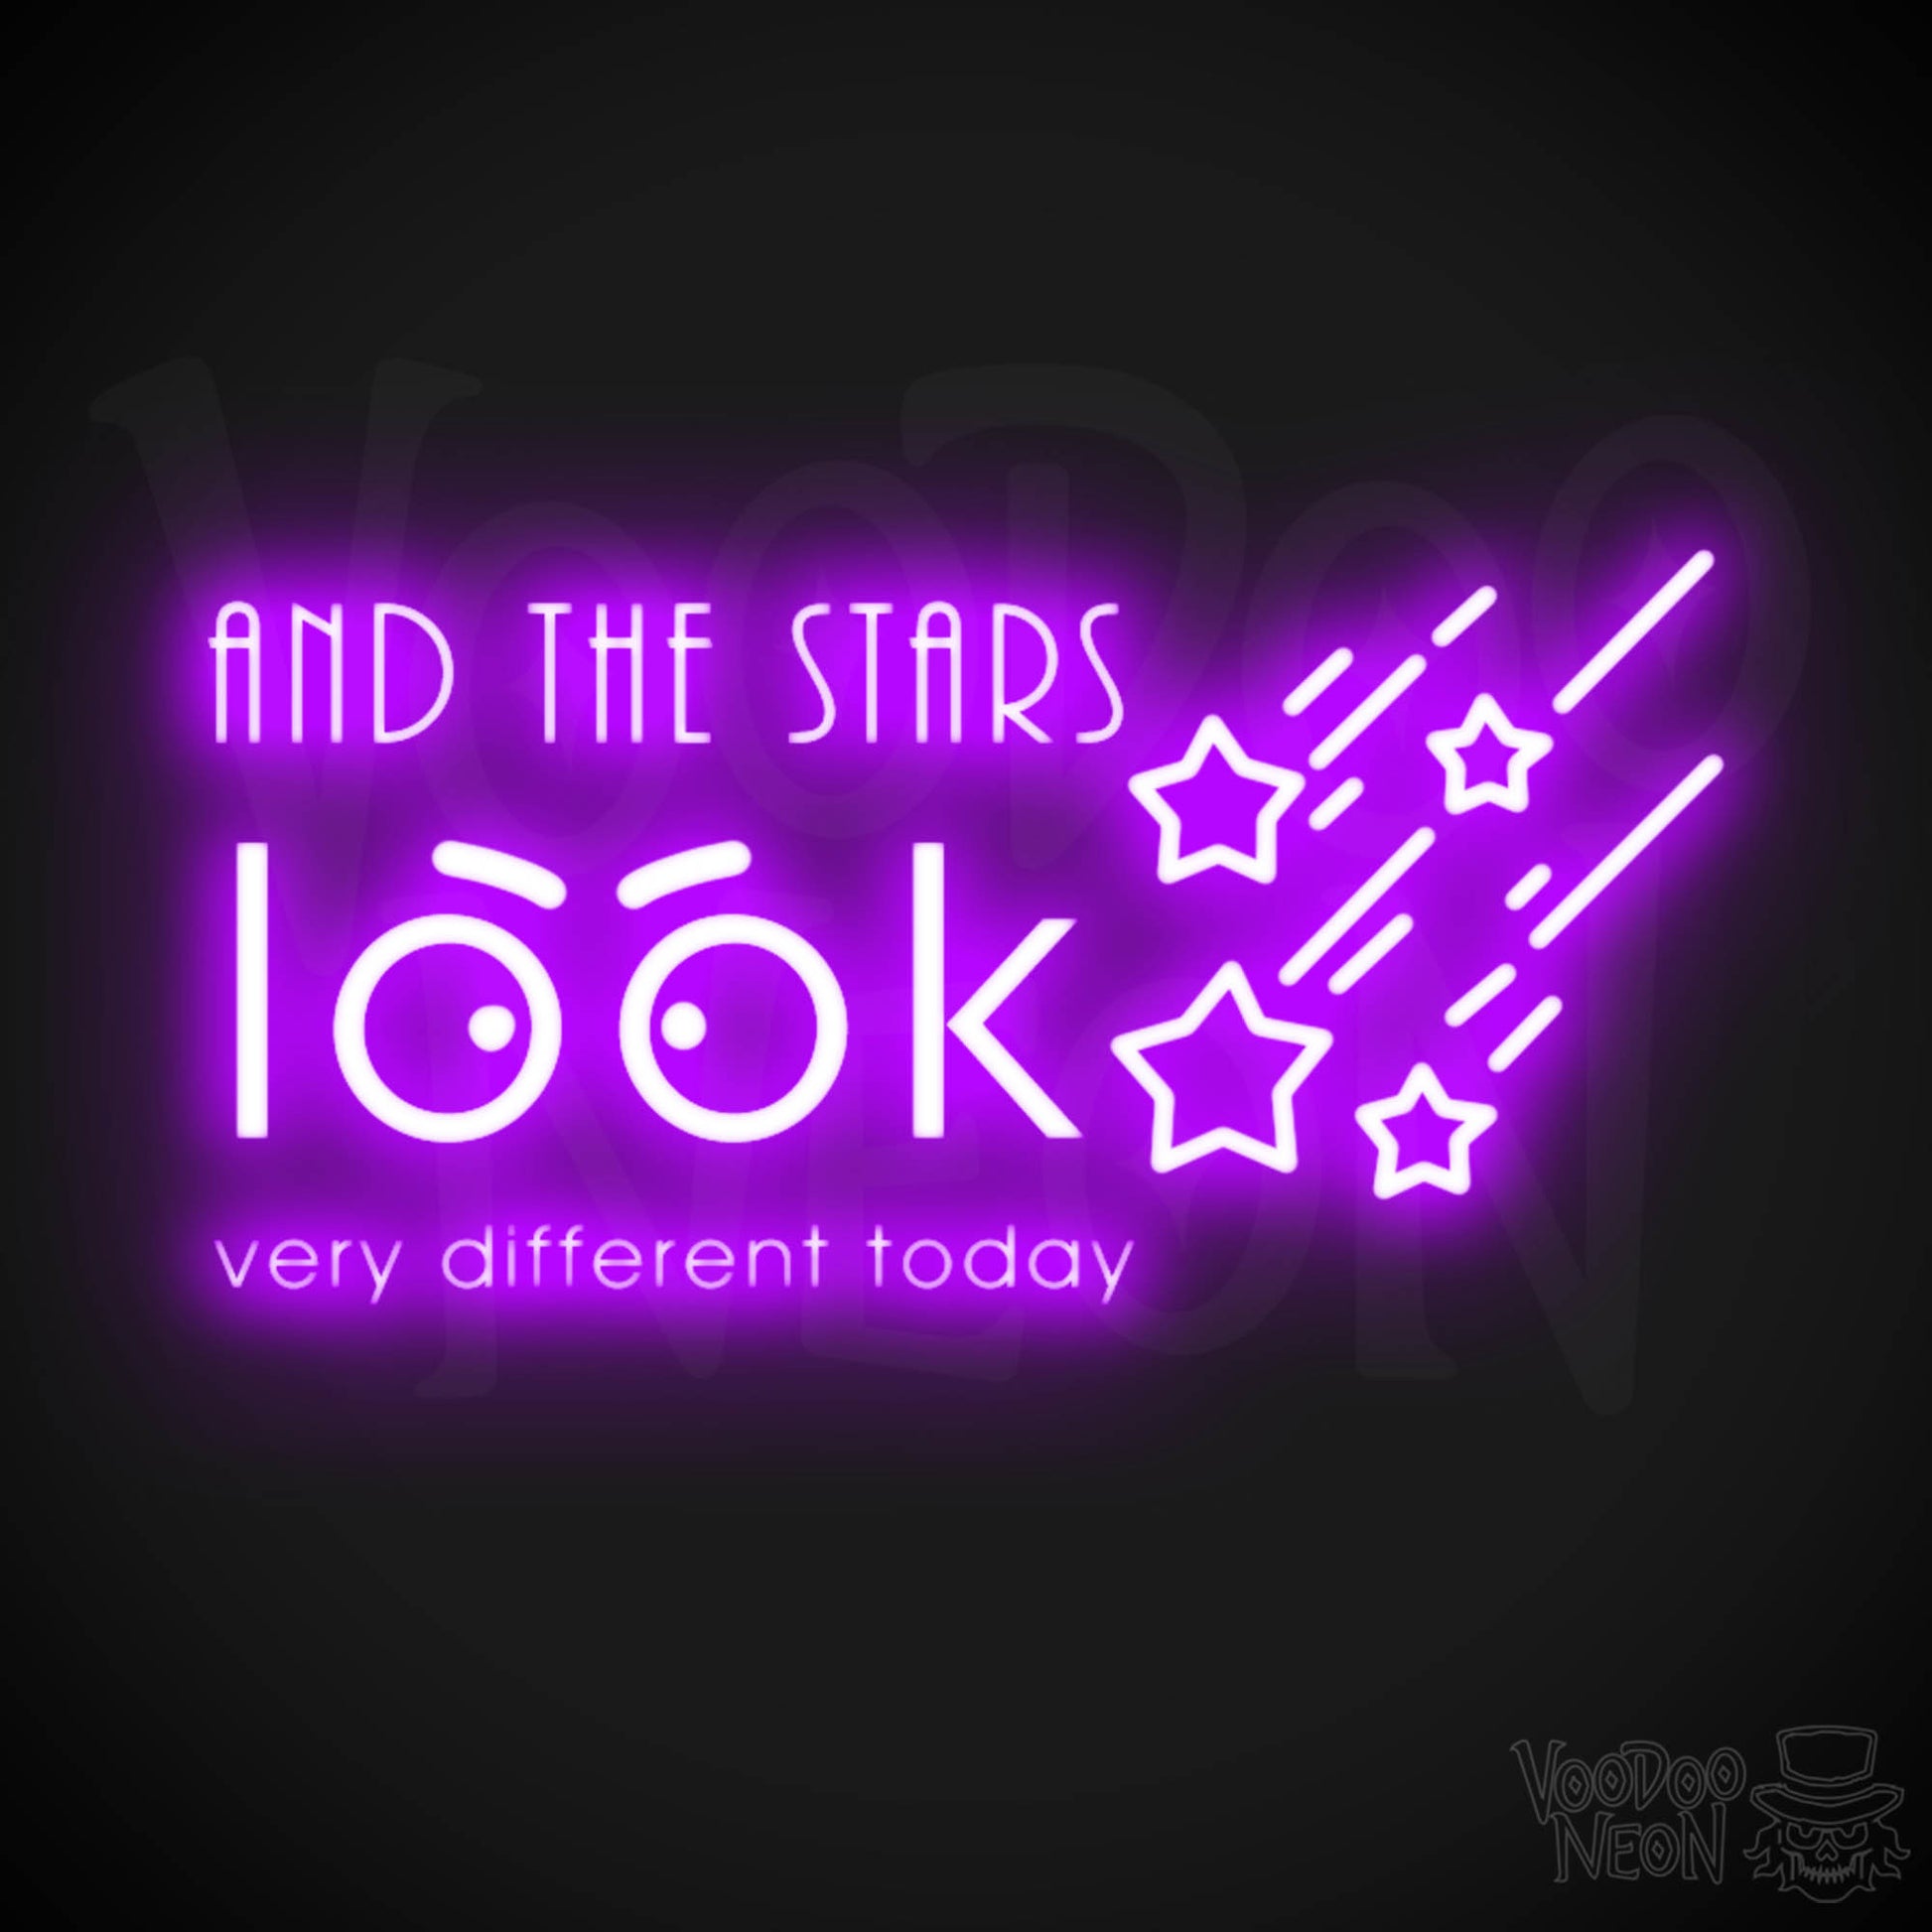 And the Stars Look Very Different Today Neon Sign - LED Wall Art - Color Purple